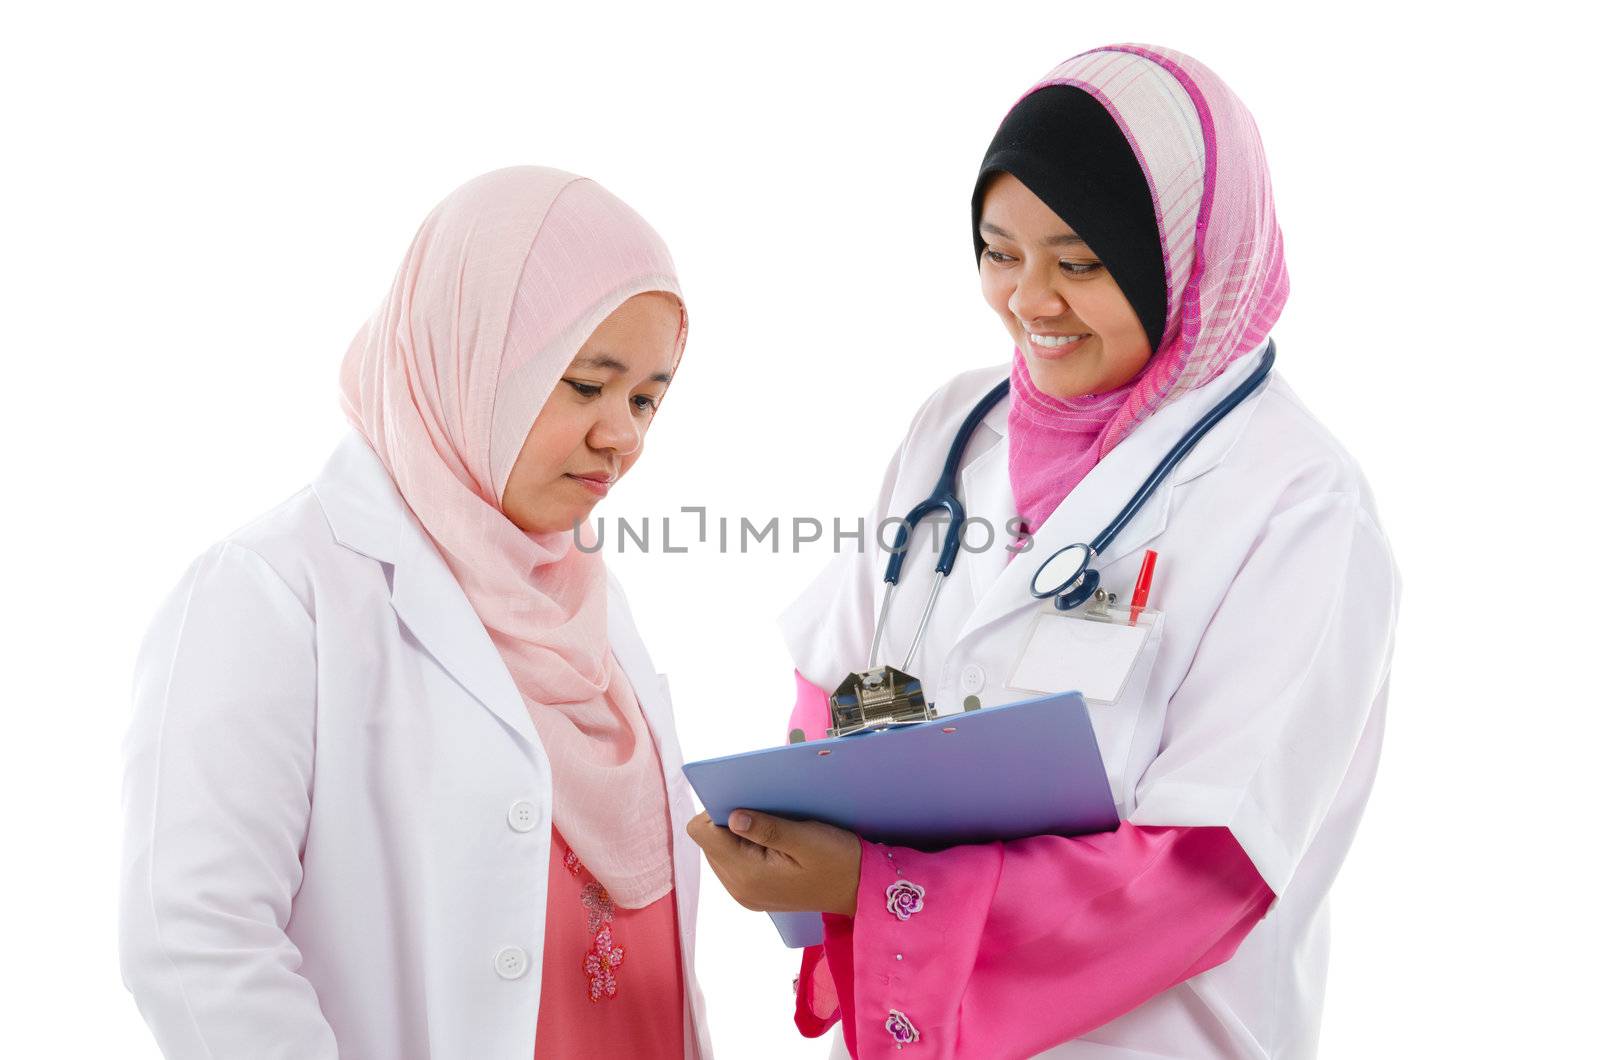 Two Southeast Asian Muslim medical doctors discussing on patient medical report, standing isolated on white background